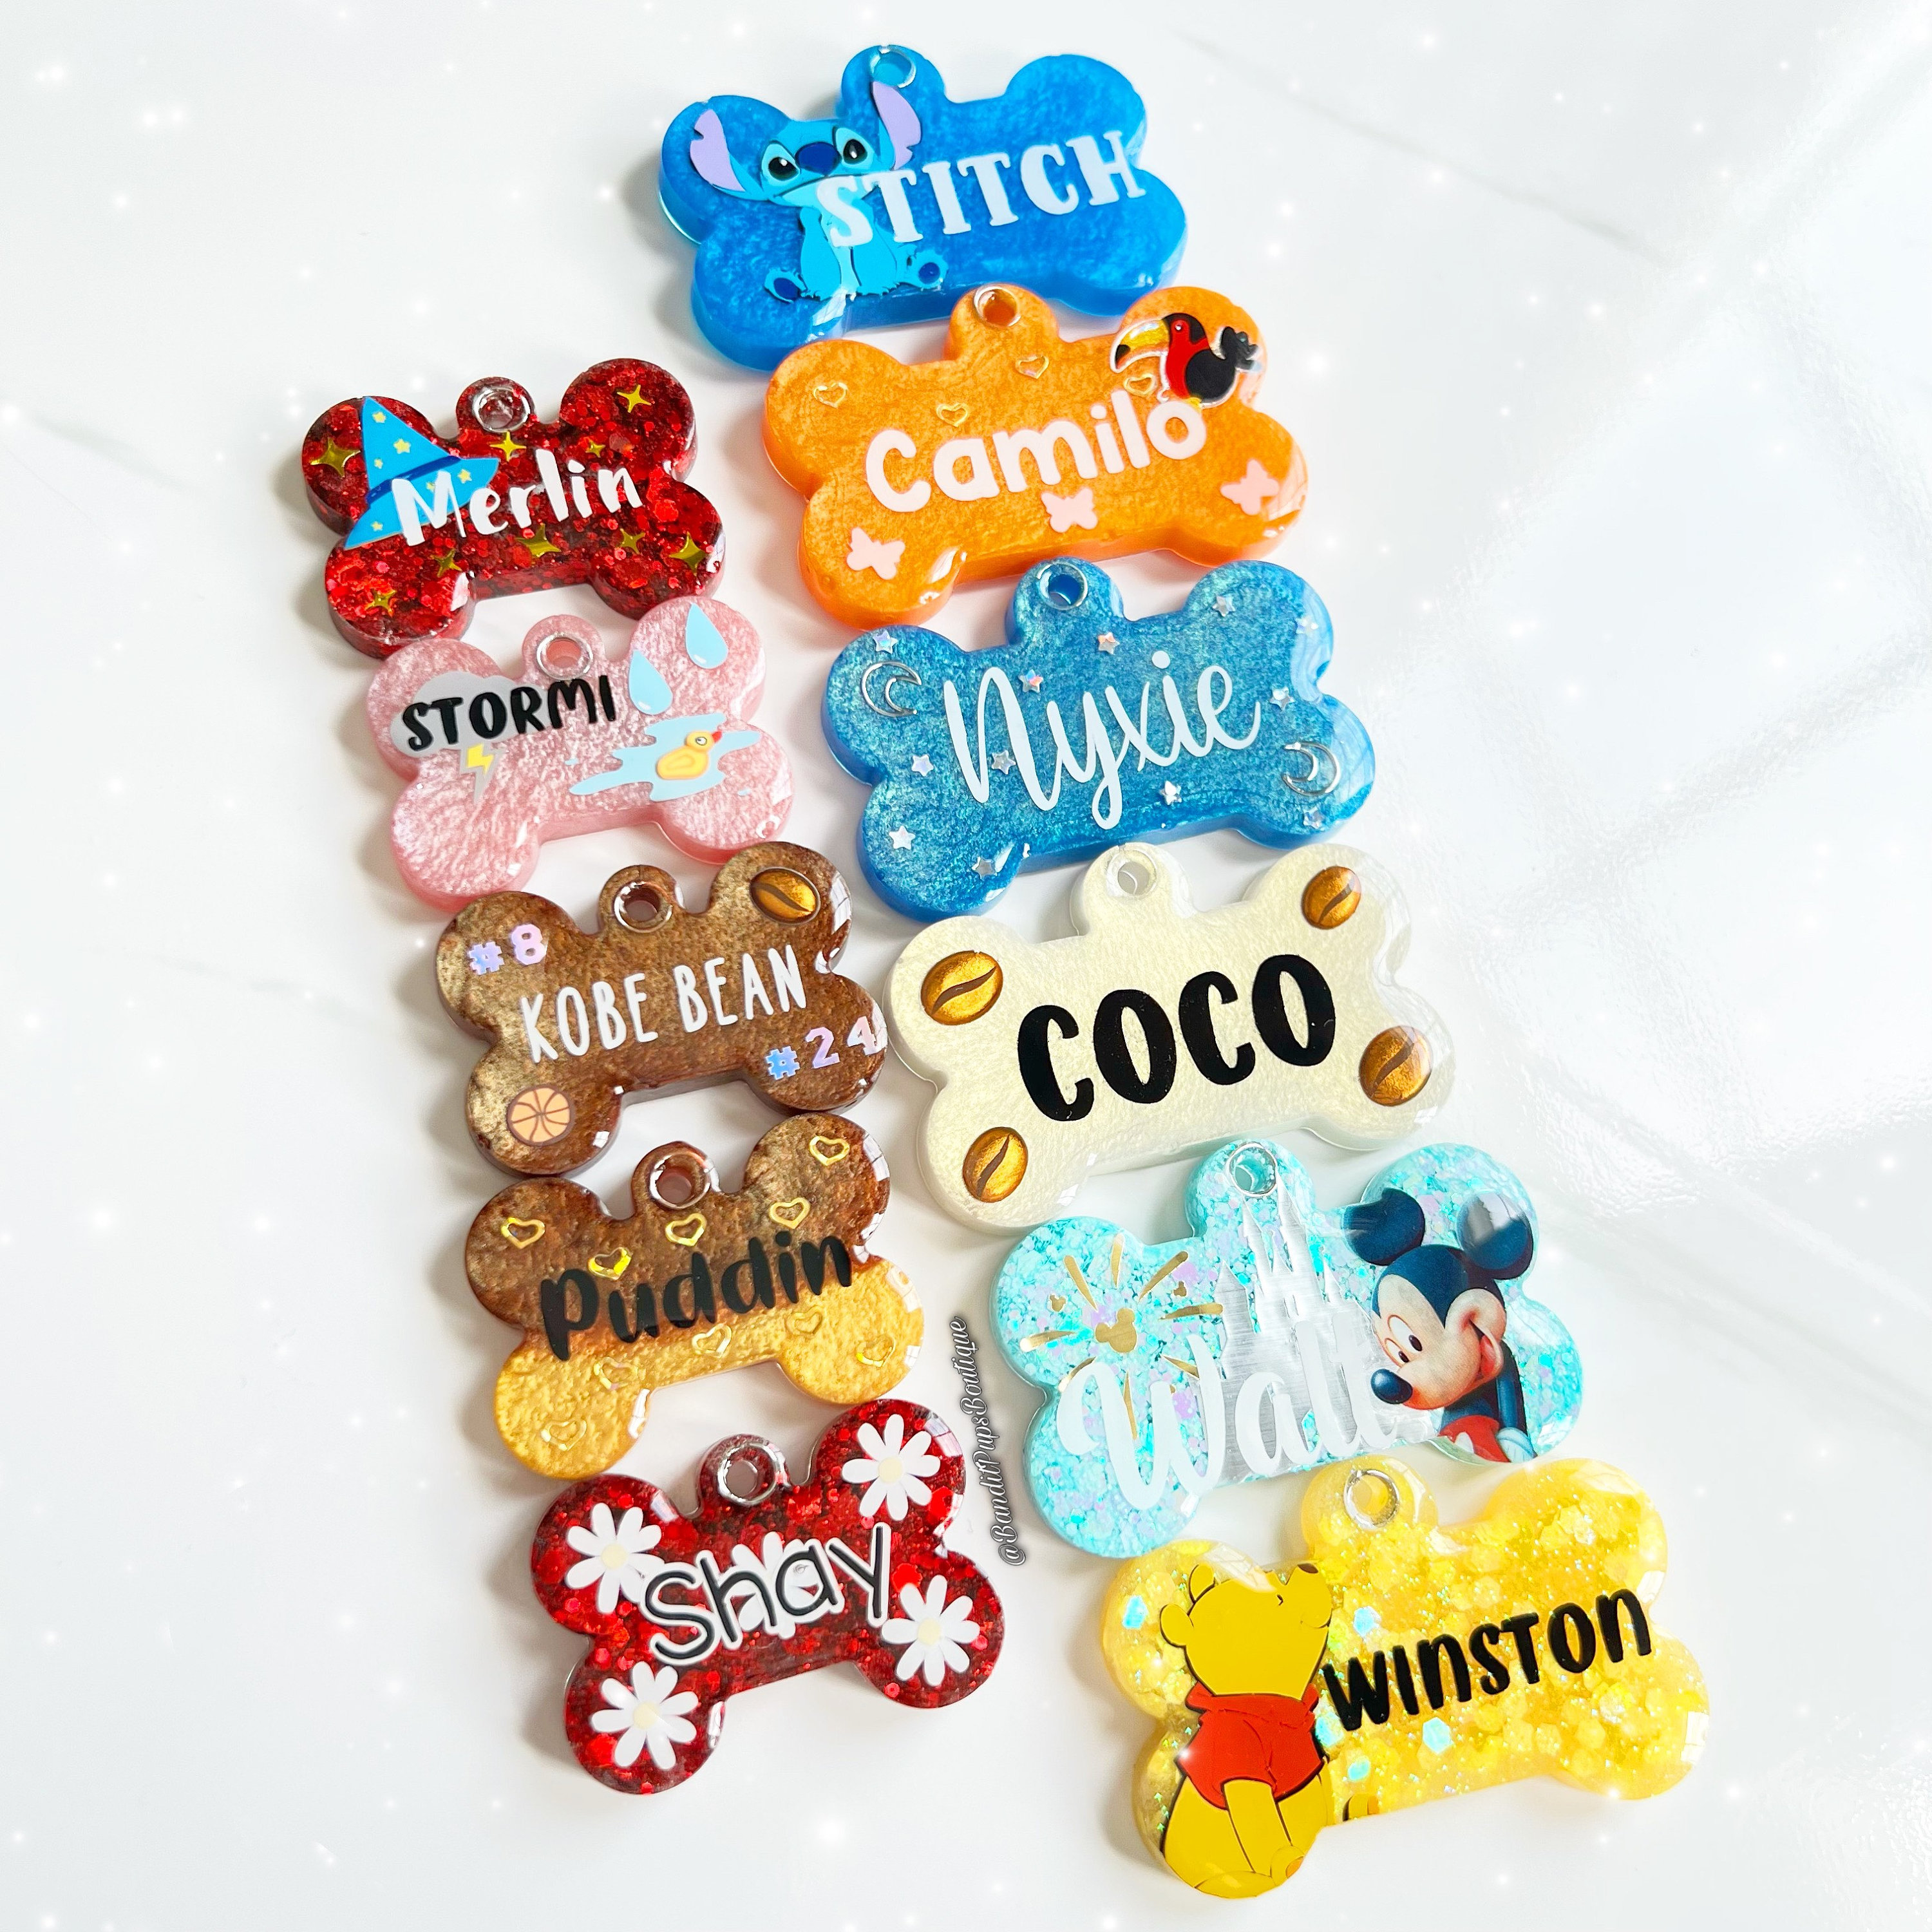 Design Your OWN Custom Pet Tag, Personalized, Custom Dog Tag, Resin Dog  Tag, Pet ID Tag, Cat Tag, Designer Tag, Glitter Tag , Resin Dog Tags 